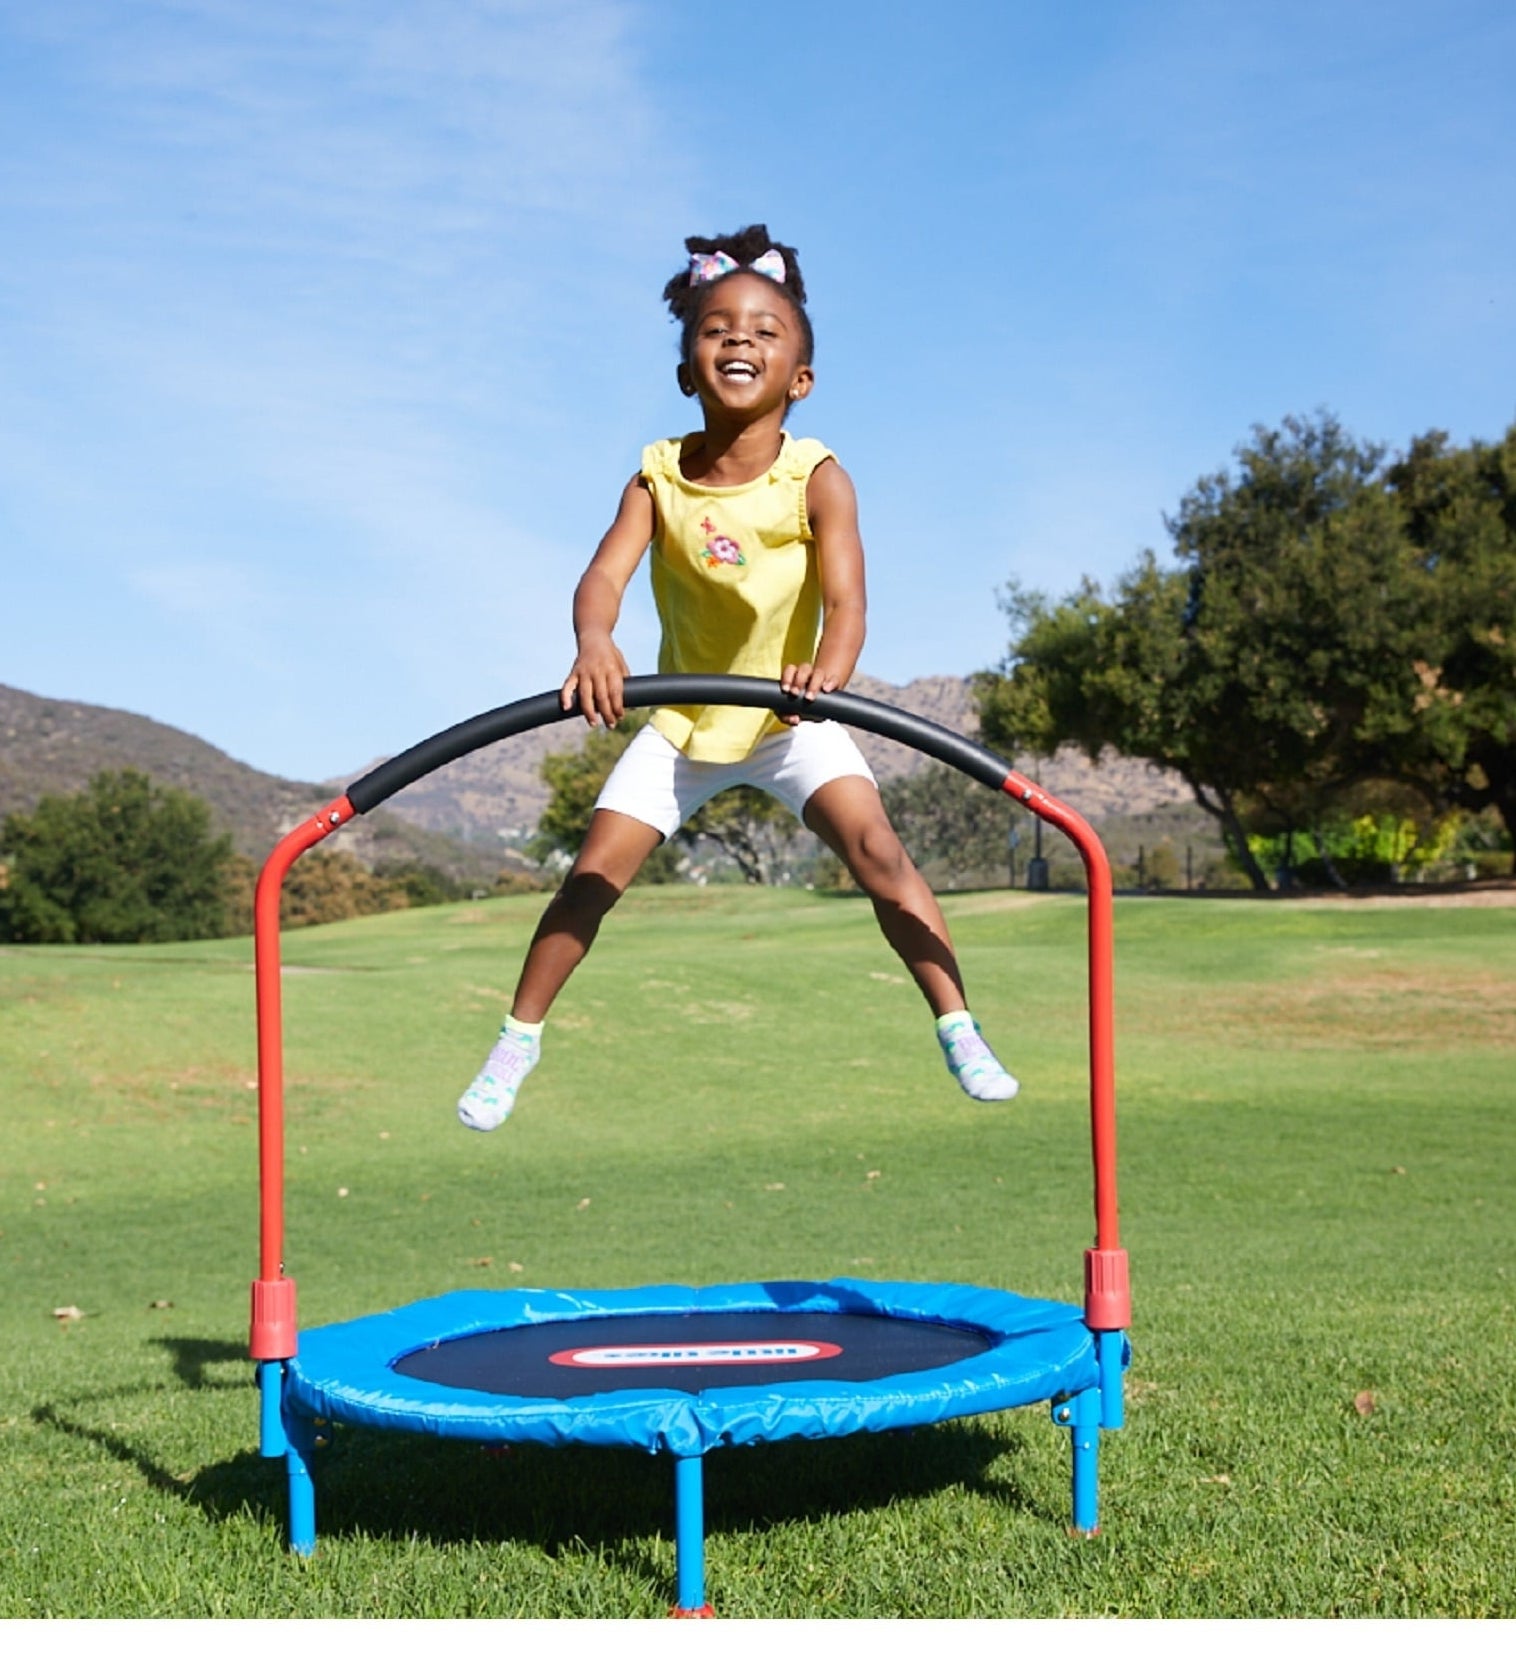 Child jumps on outdoor trampoline with handlebar in a sunny grassy area